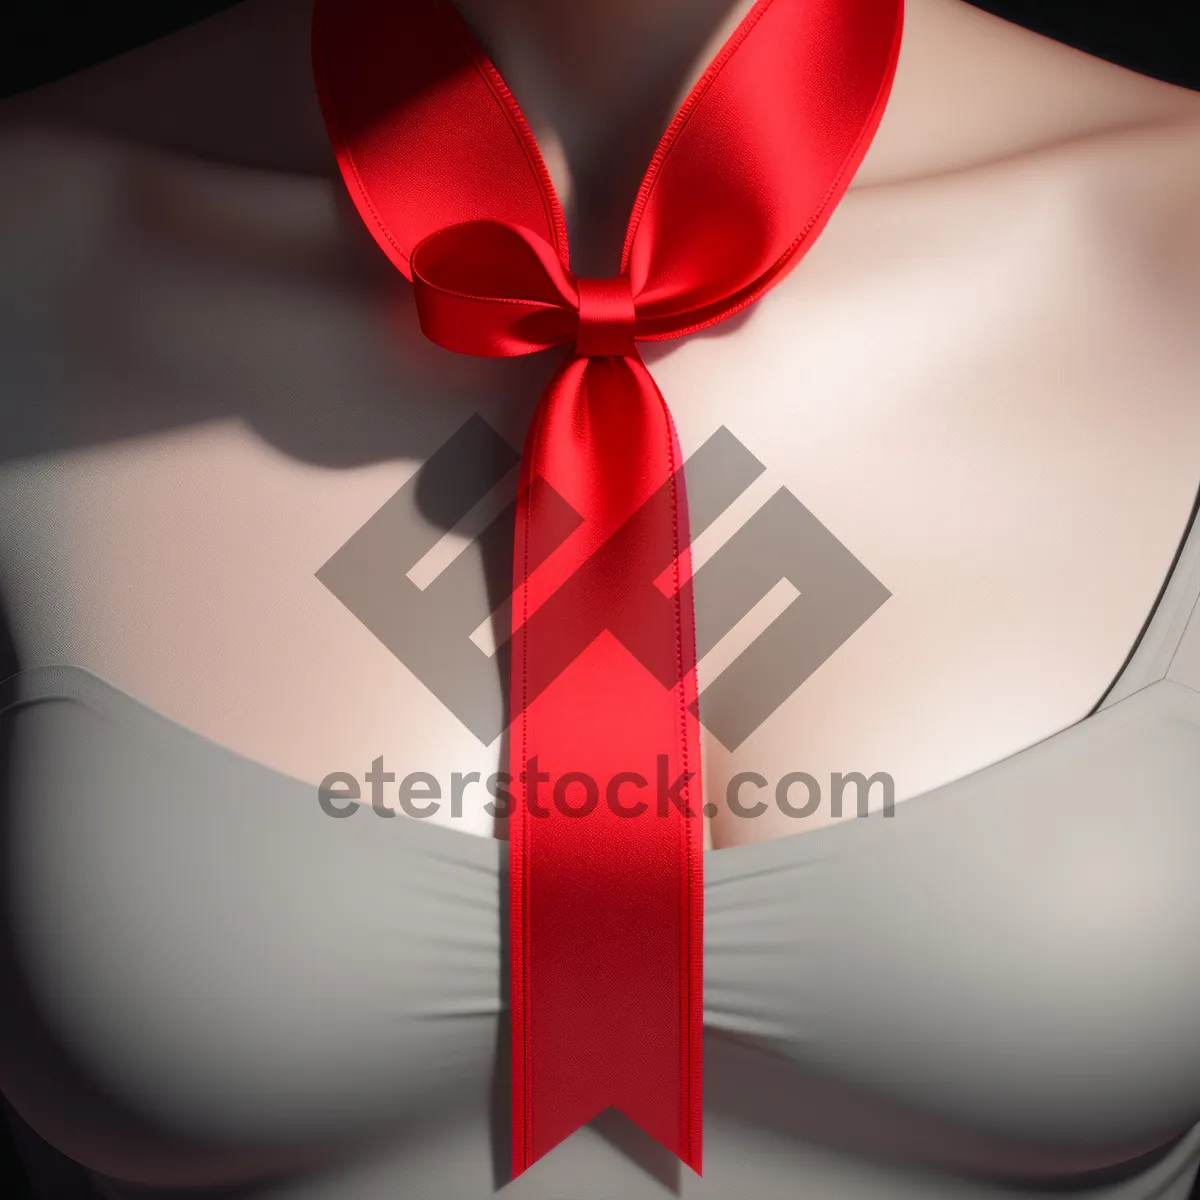 Picture of Shiny Silk Ribbon Bow for Festive Gift Presentation